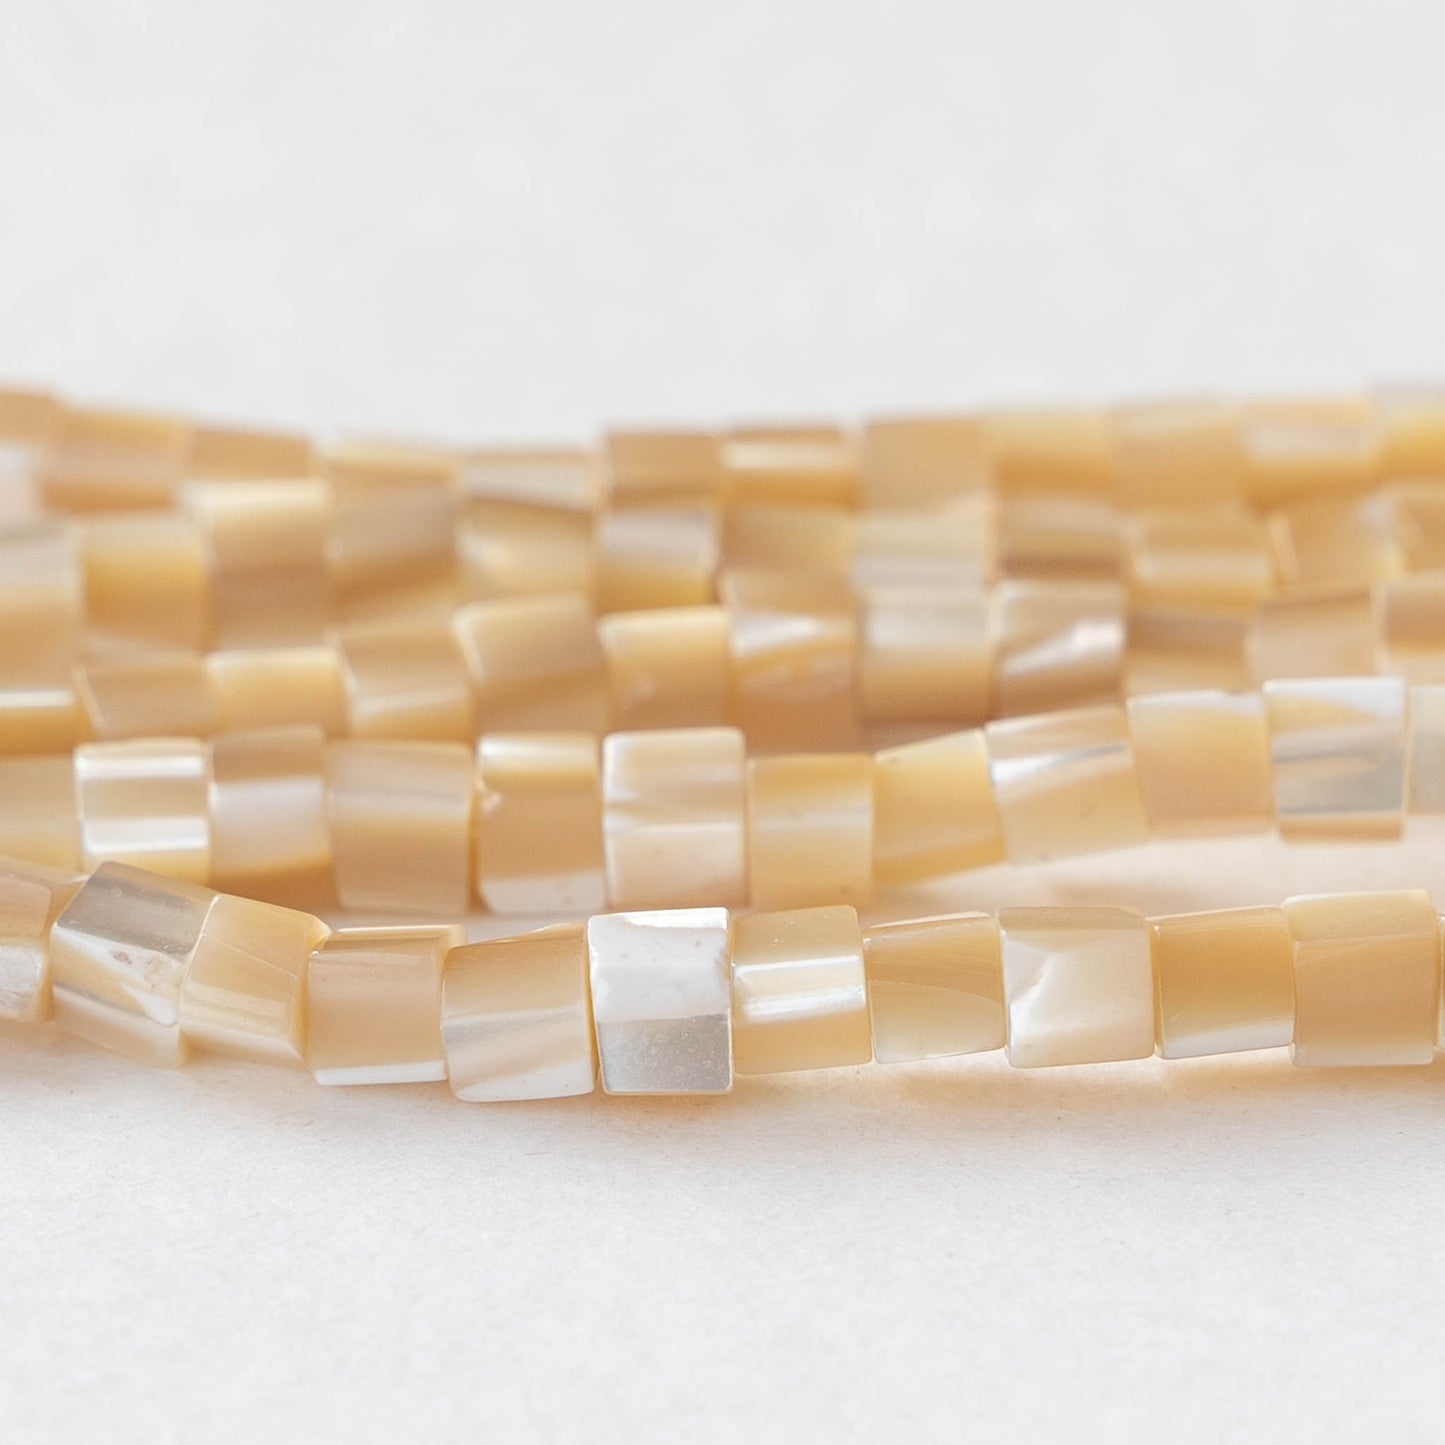 4mm Natural Mother Of Pearl Cube Beads - Beige Shell - 16 Inch Strand